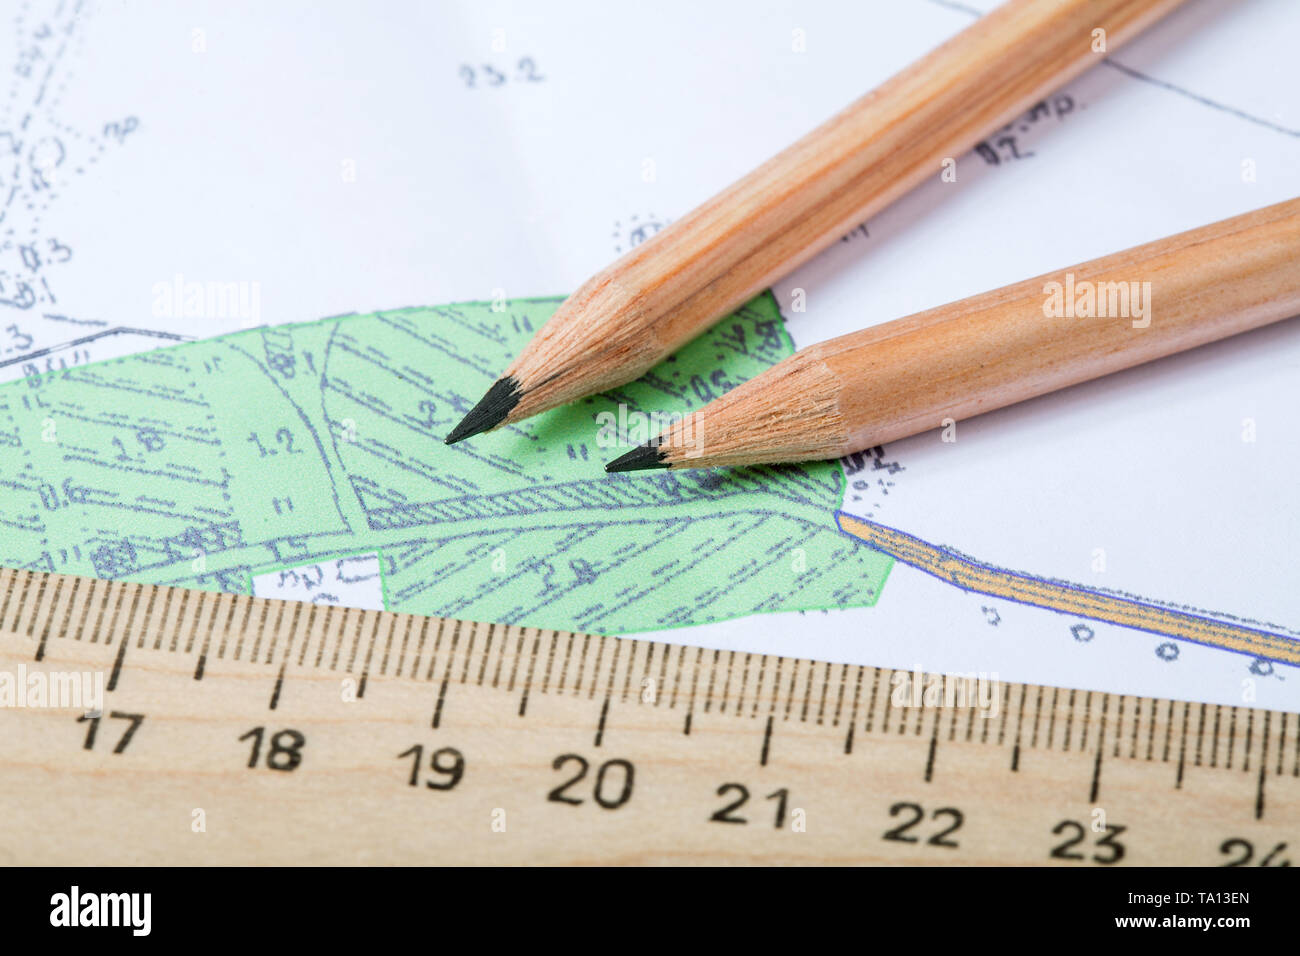 topographic map with pencils lying on it close up Stock Photo